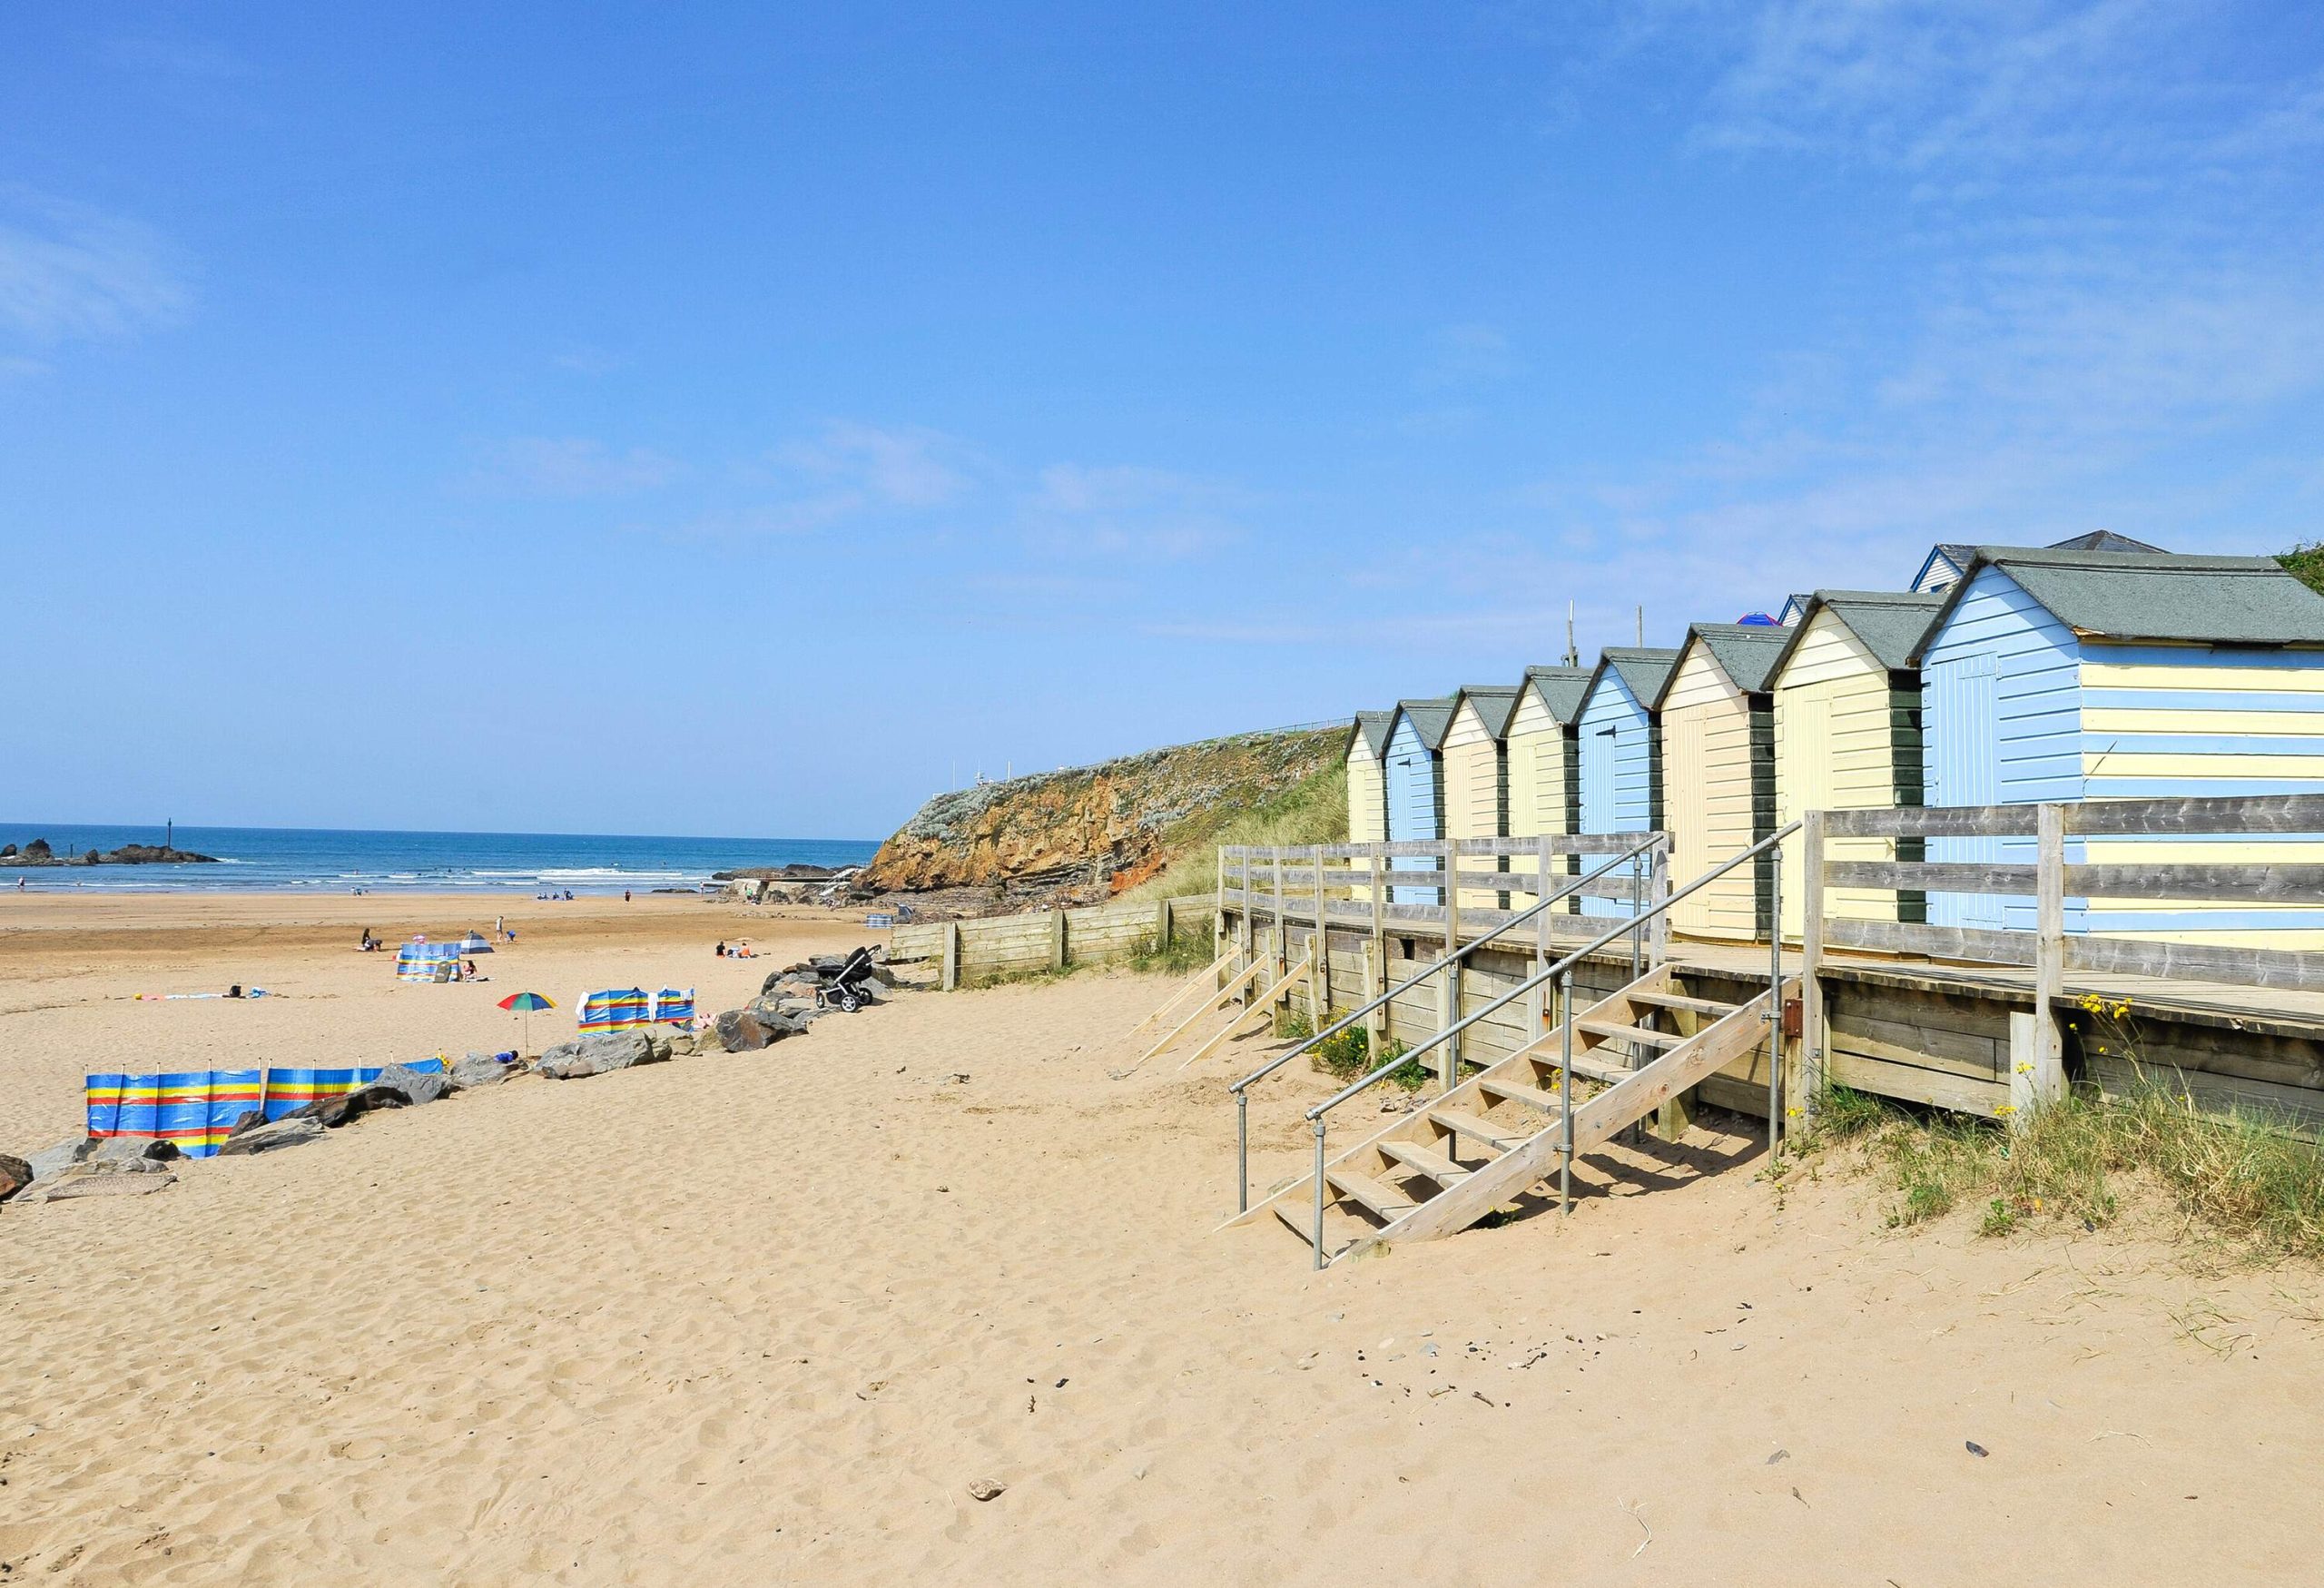 A sandy shore with colourful beach huts against the clear blue sky.